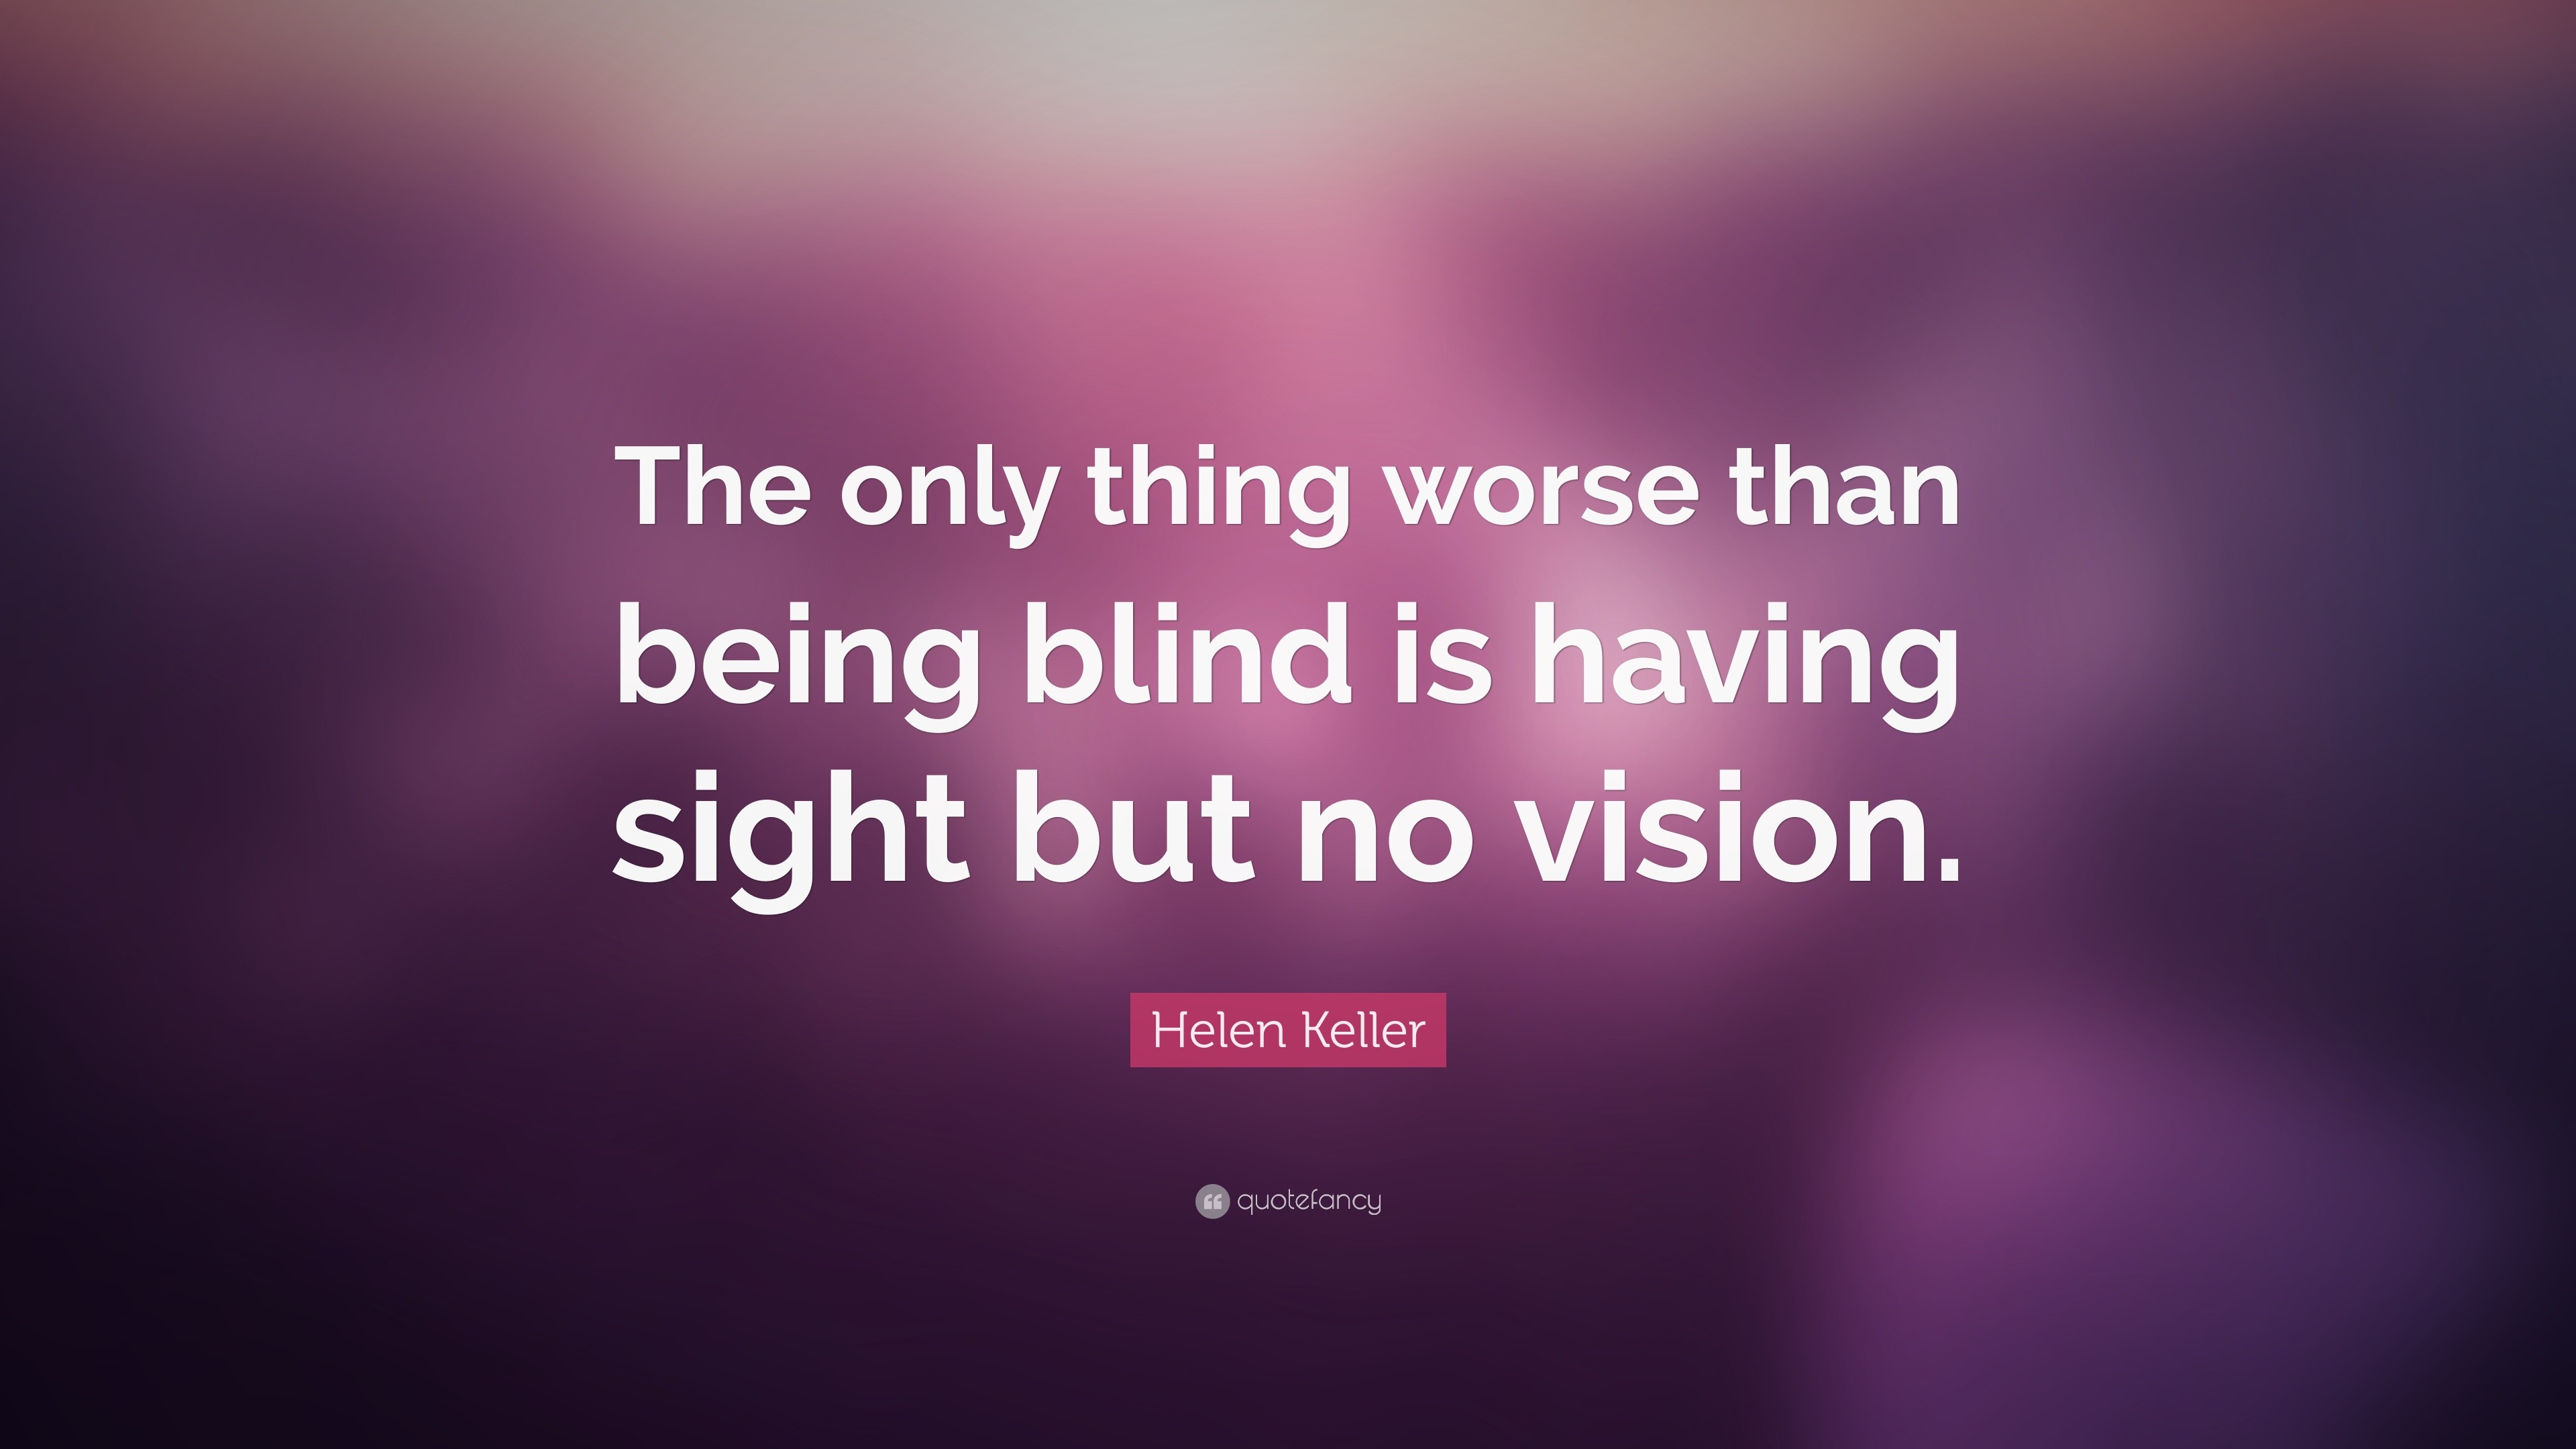 Helen Keller Quote: “The only thing worse than being blind is having